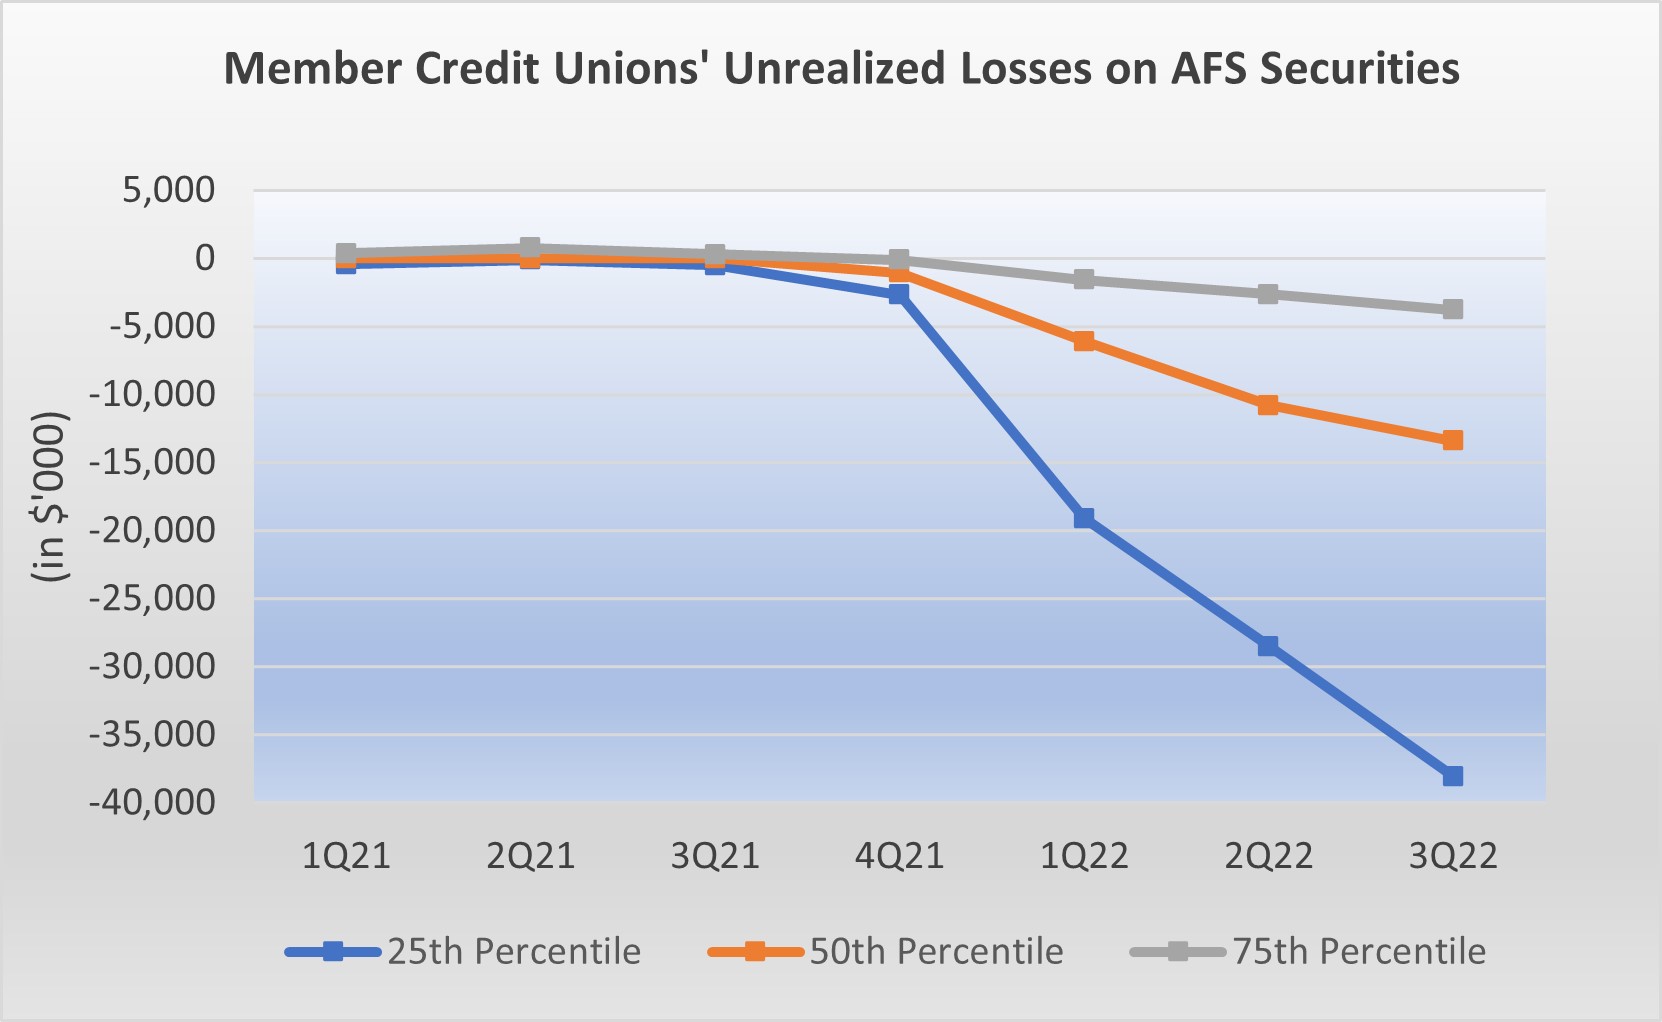 Chart Showing Member Credit Unions' Unrealized Loses on AFS Securities